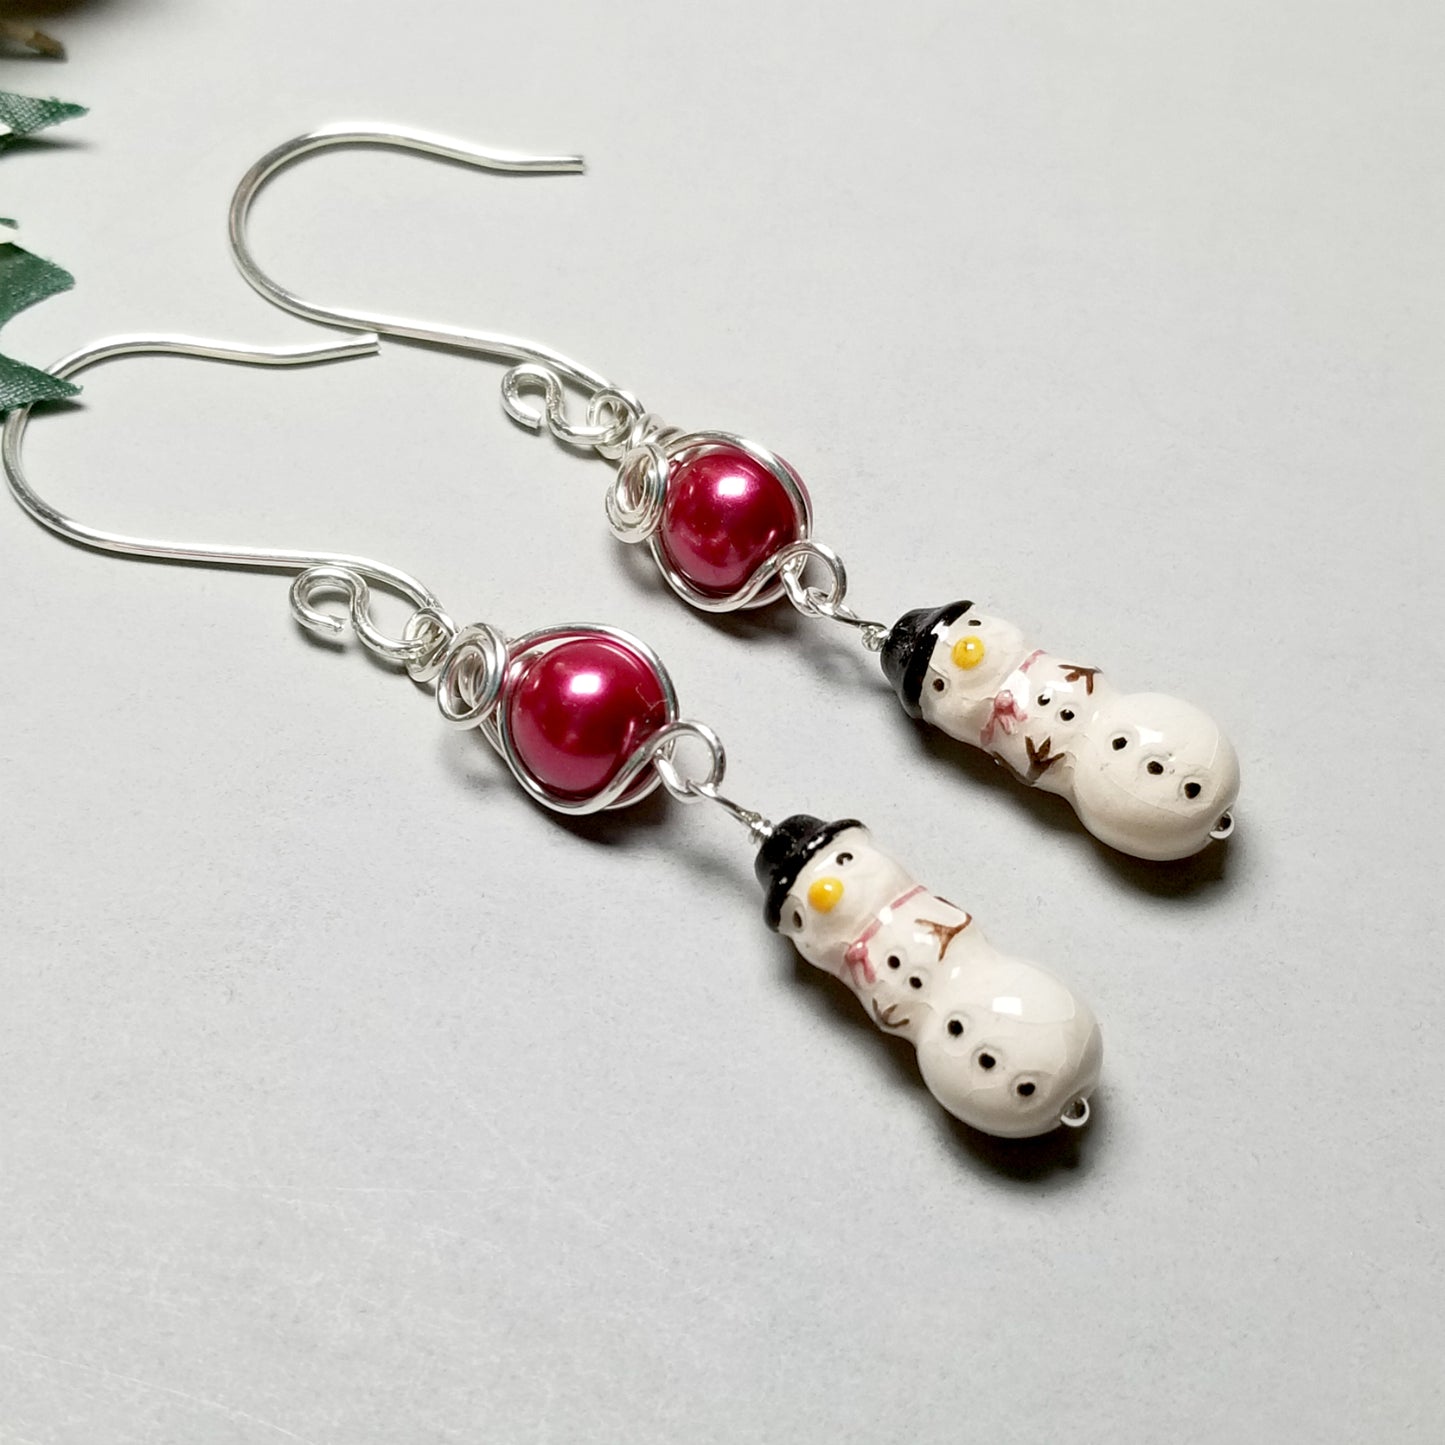 Holiday Beaded Jewelry, Snowman Holiday Earrings, Gift for Mom